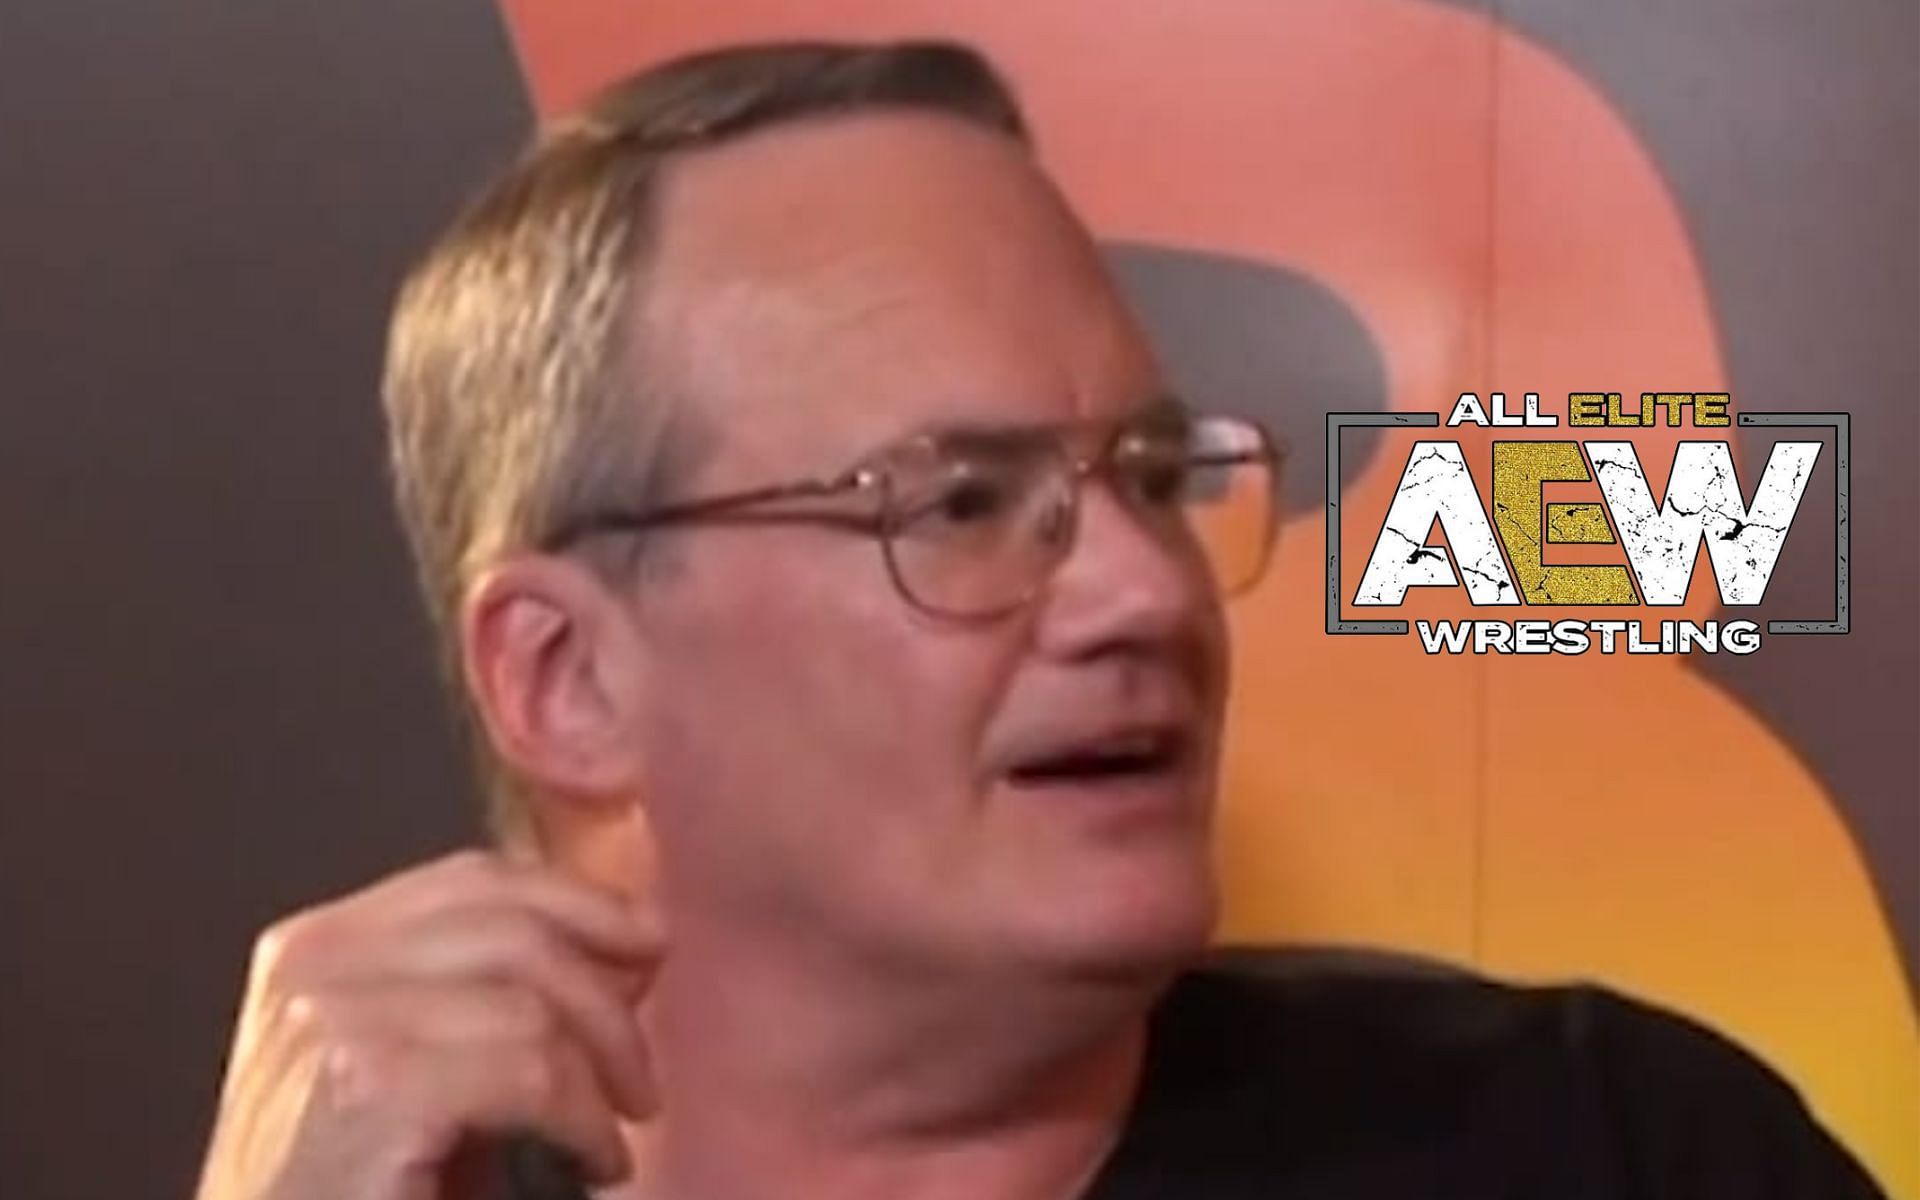 Legendary wrestling figure Jim Cornette lashed out on this specific AEW segment last week.